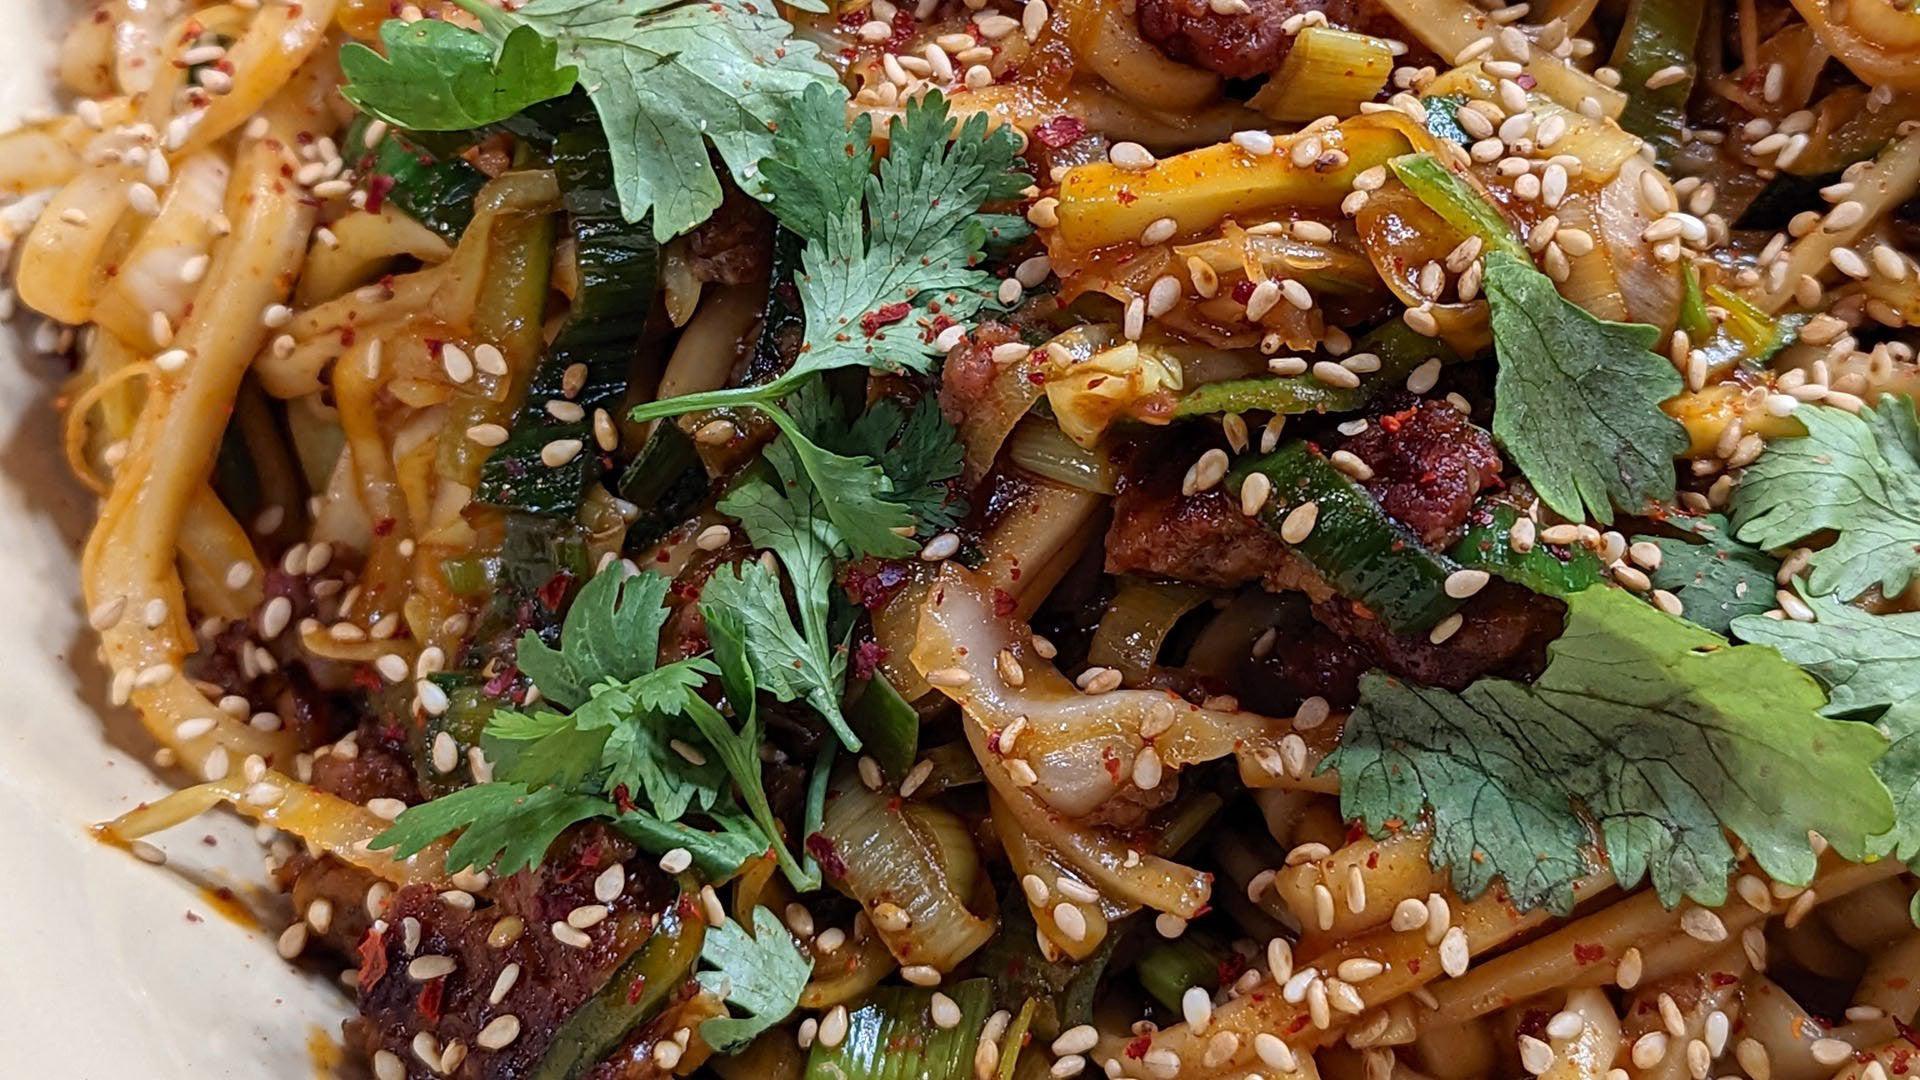 Korean-Style Noodles with Veggies and Spicy Sausage | MYOTO Recipe